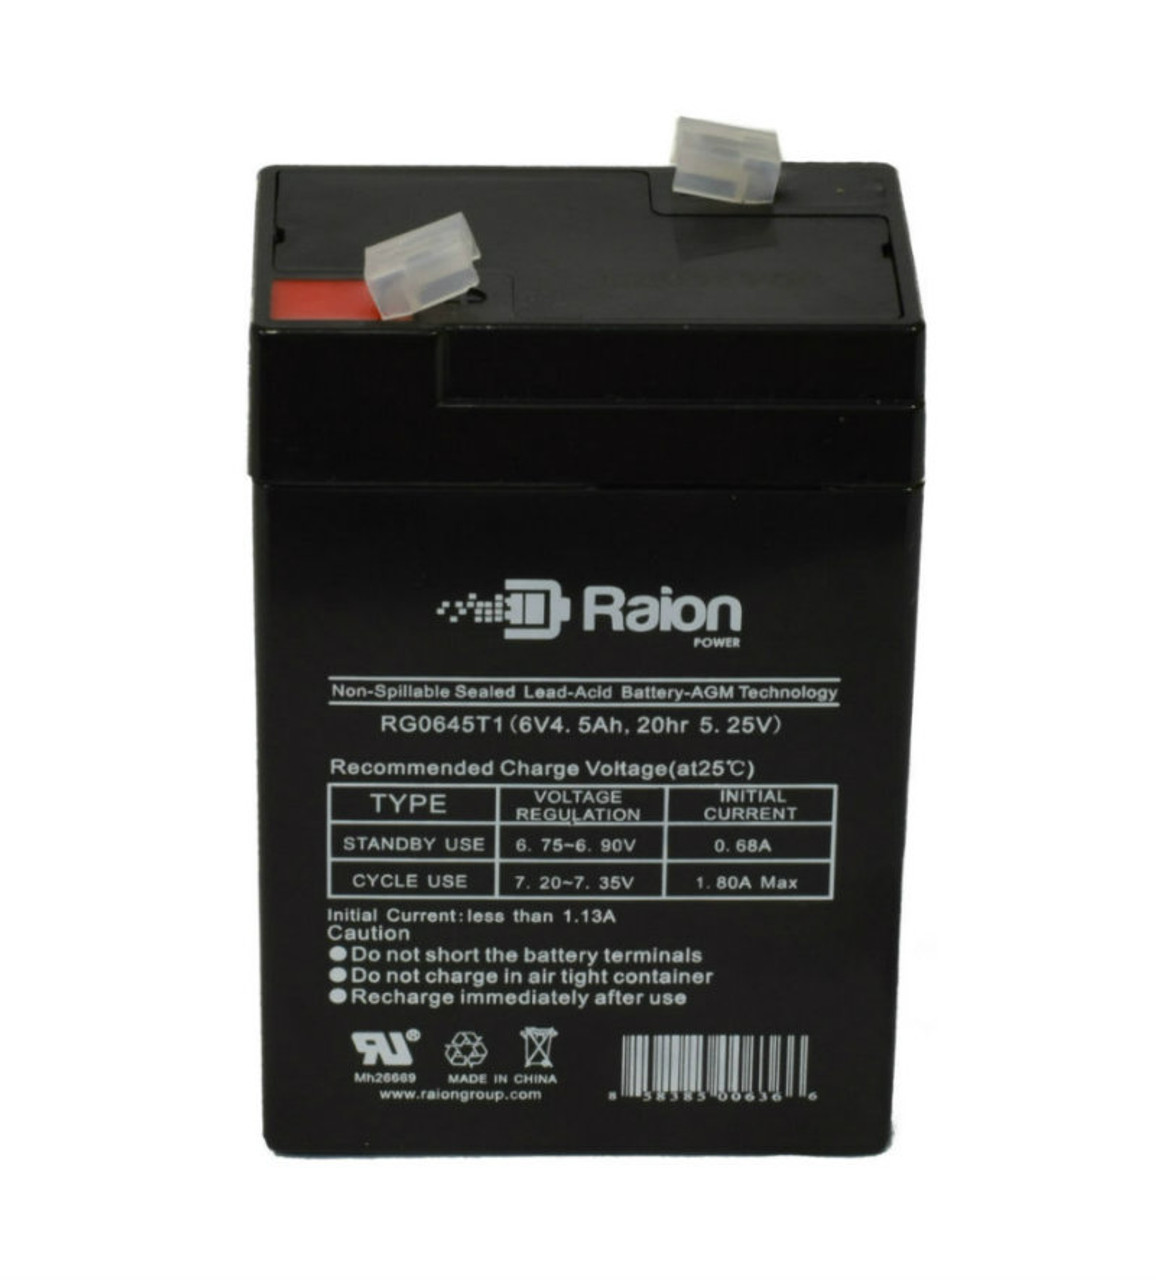 Raion Power RG0645T1 Replacement Battery Cartridge for Peg Perego IGED0092US 6V Rocky